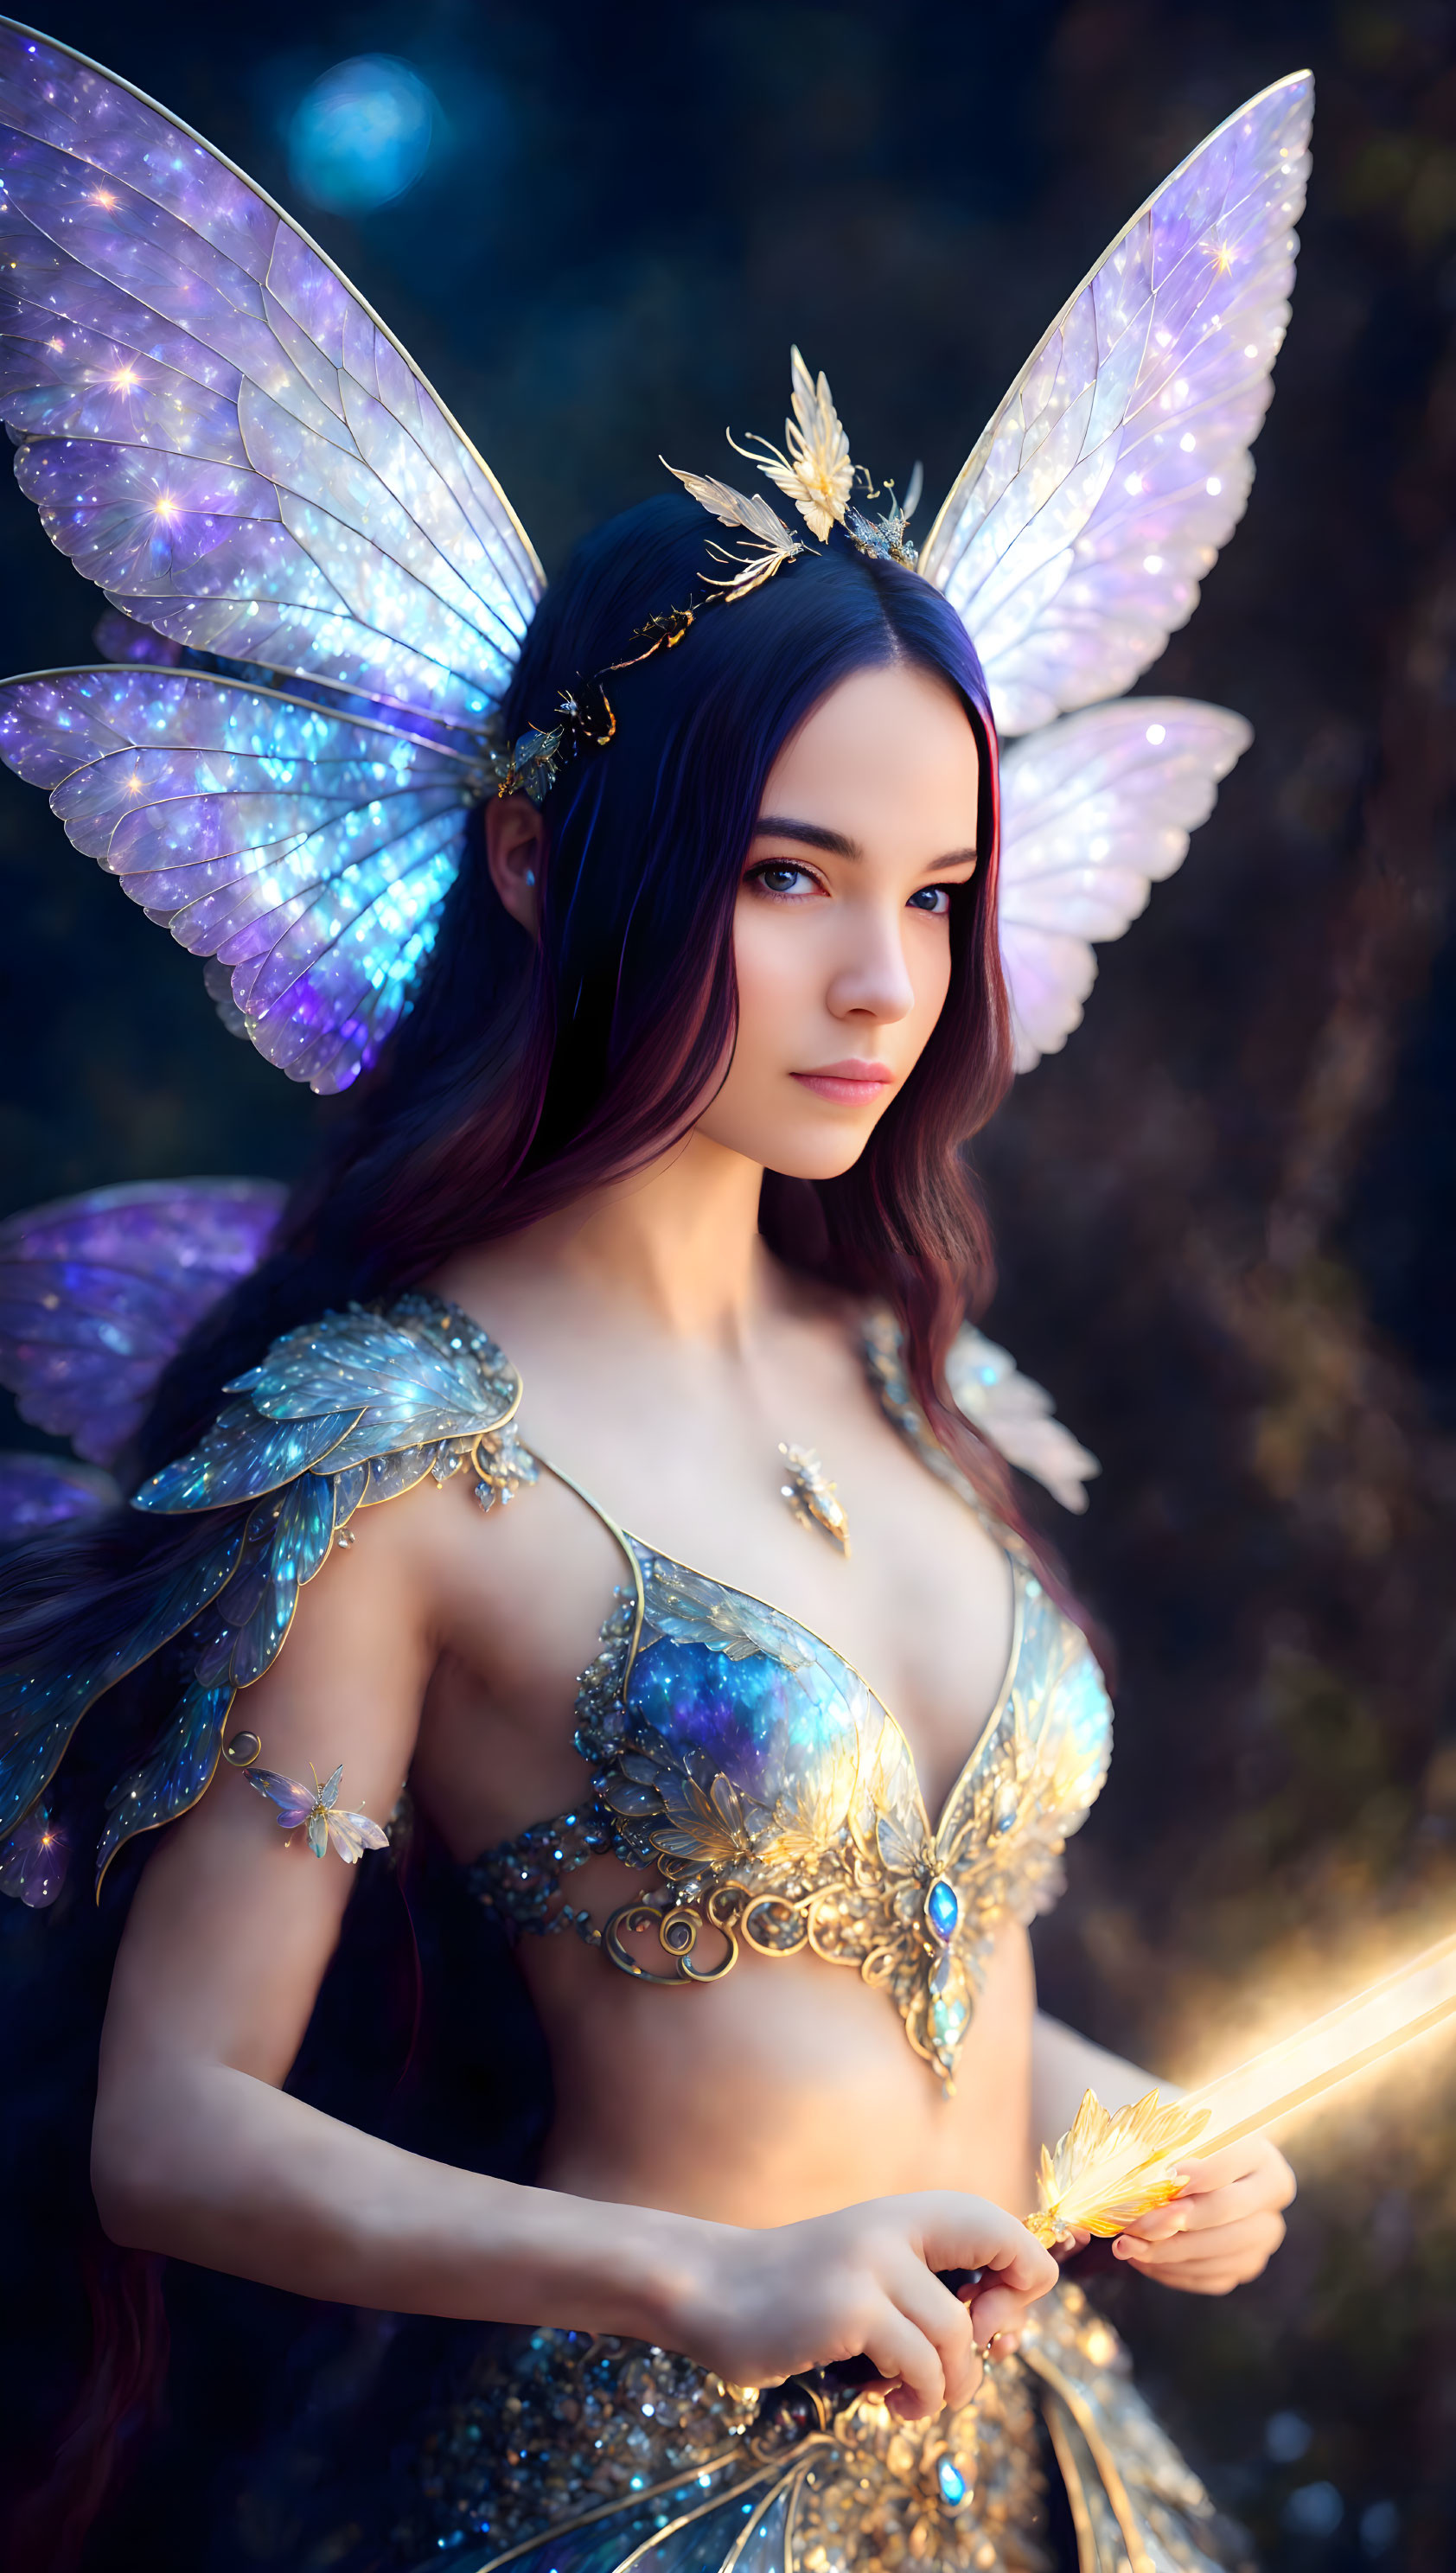 Elaborate fairy costume with detailed wings and ornate attire